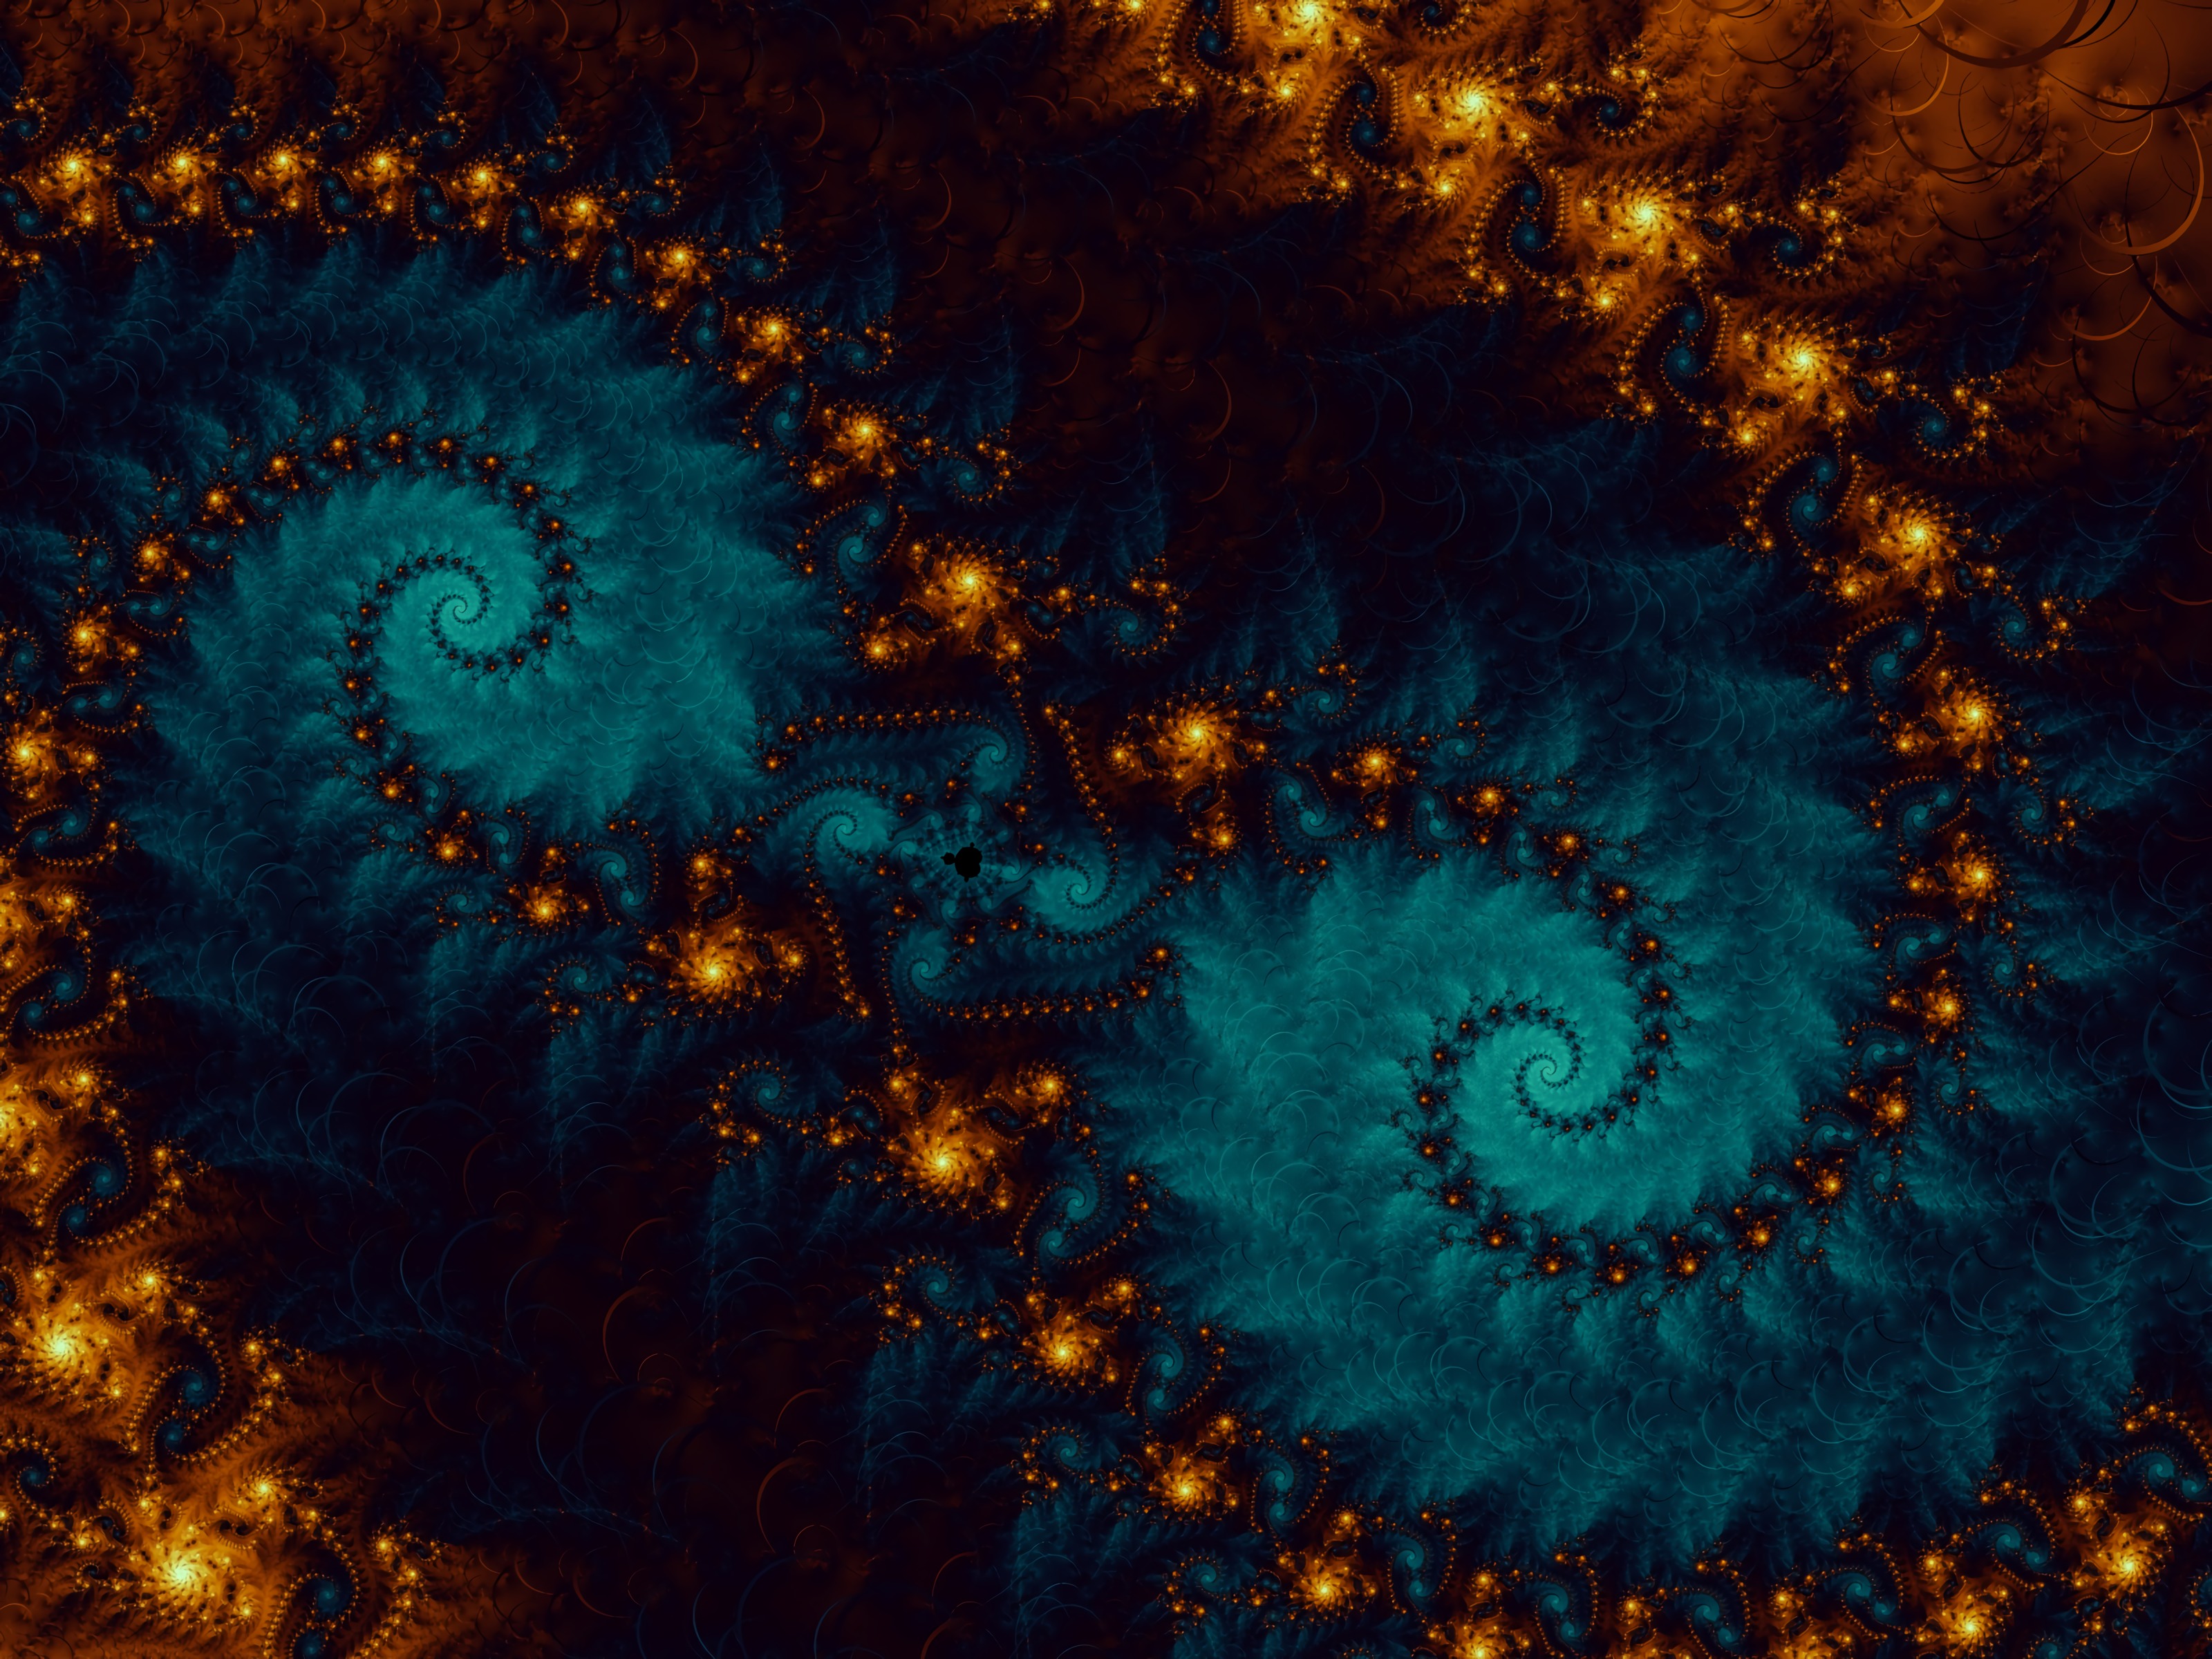 fractal, abstract, pattern, spiral, swirling, involute 2160p